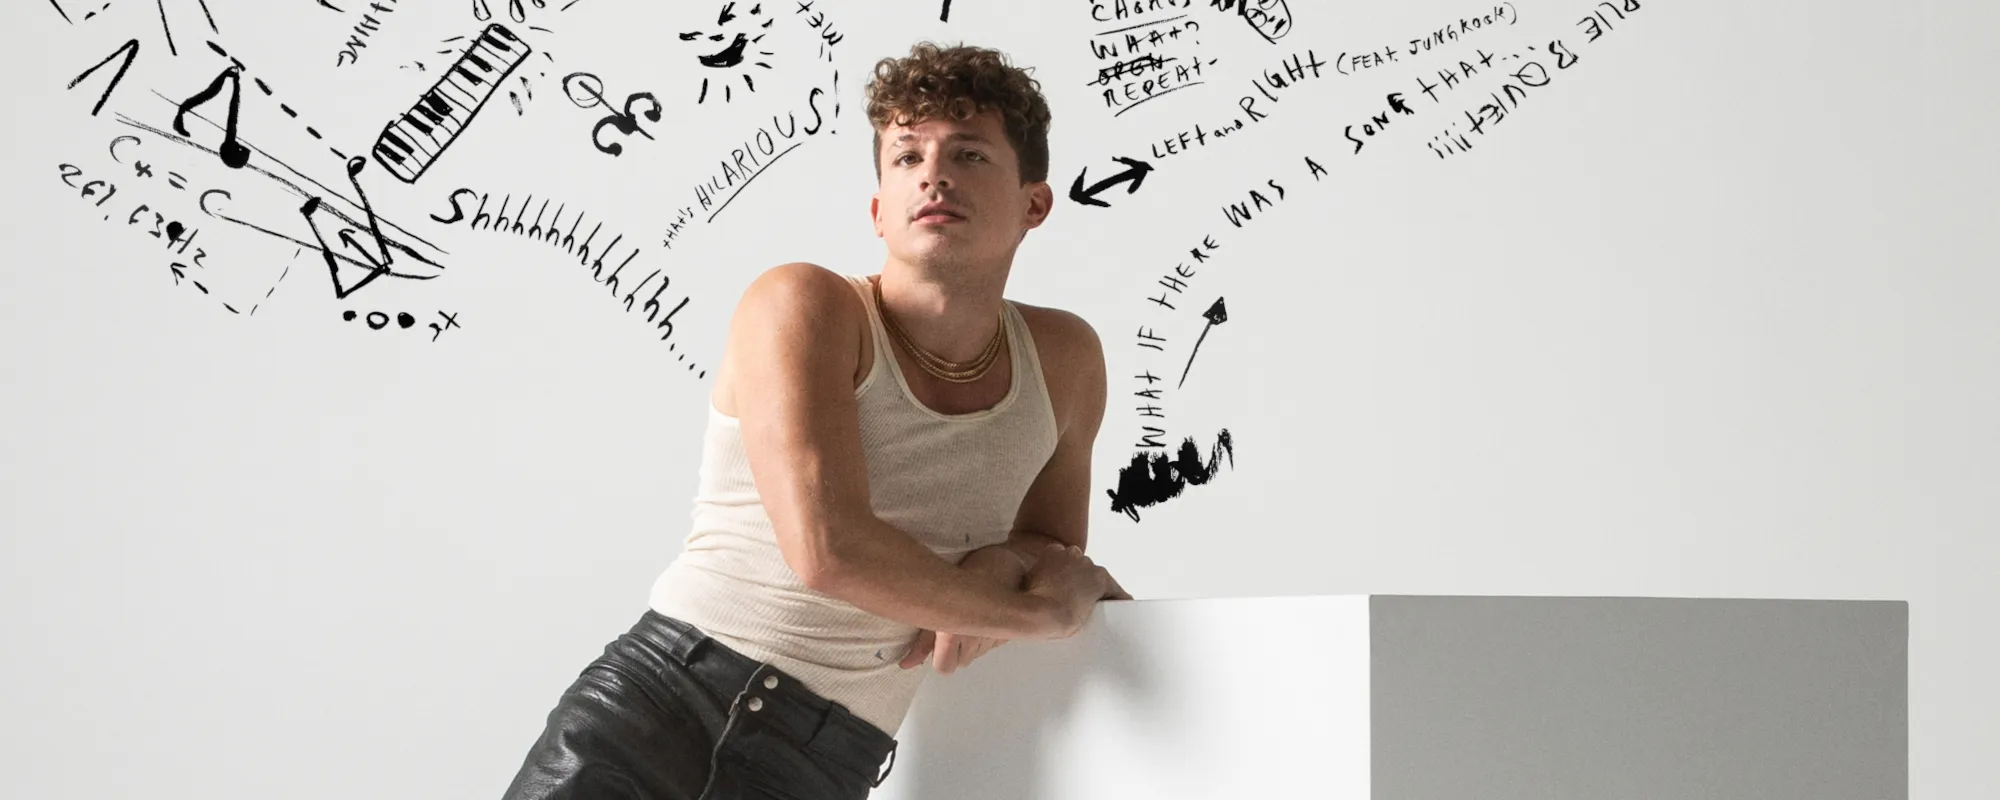 Charlie Puth Tackles a Breakup in Latest Single, “Smells Like Me”